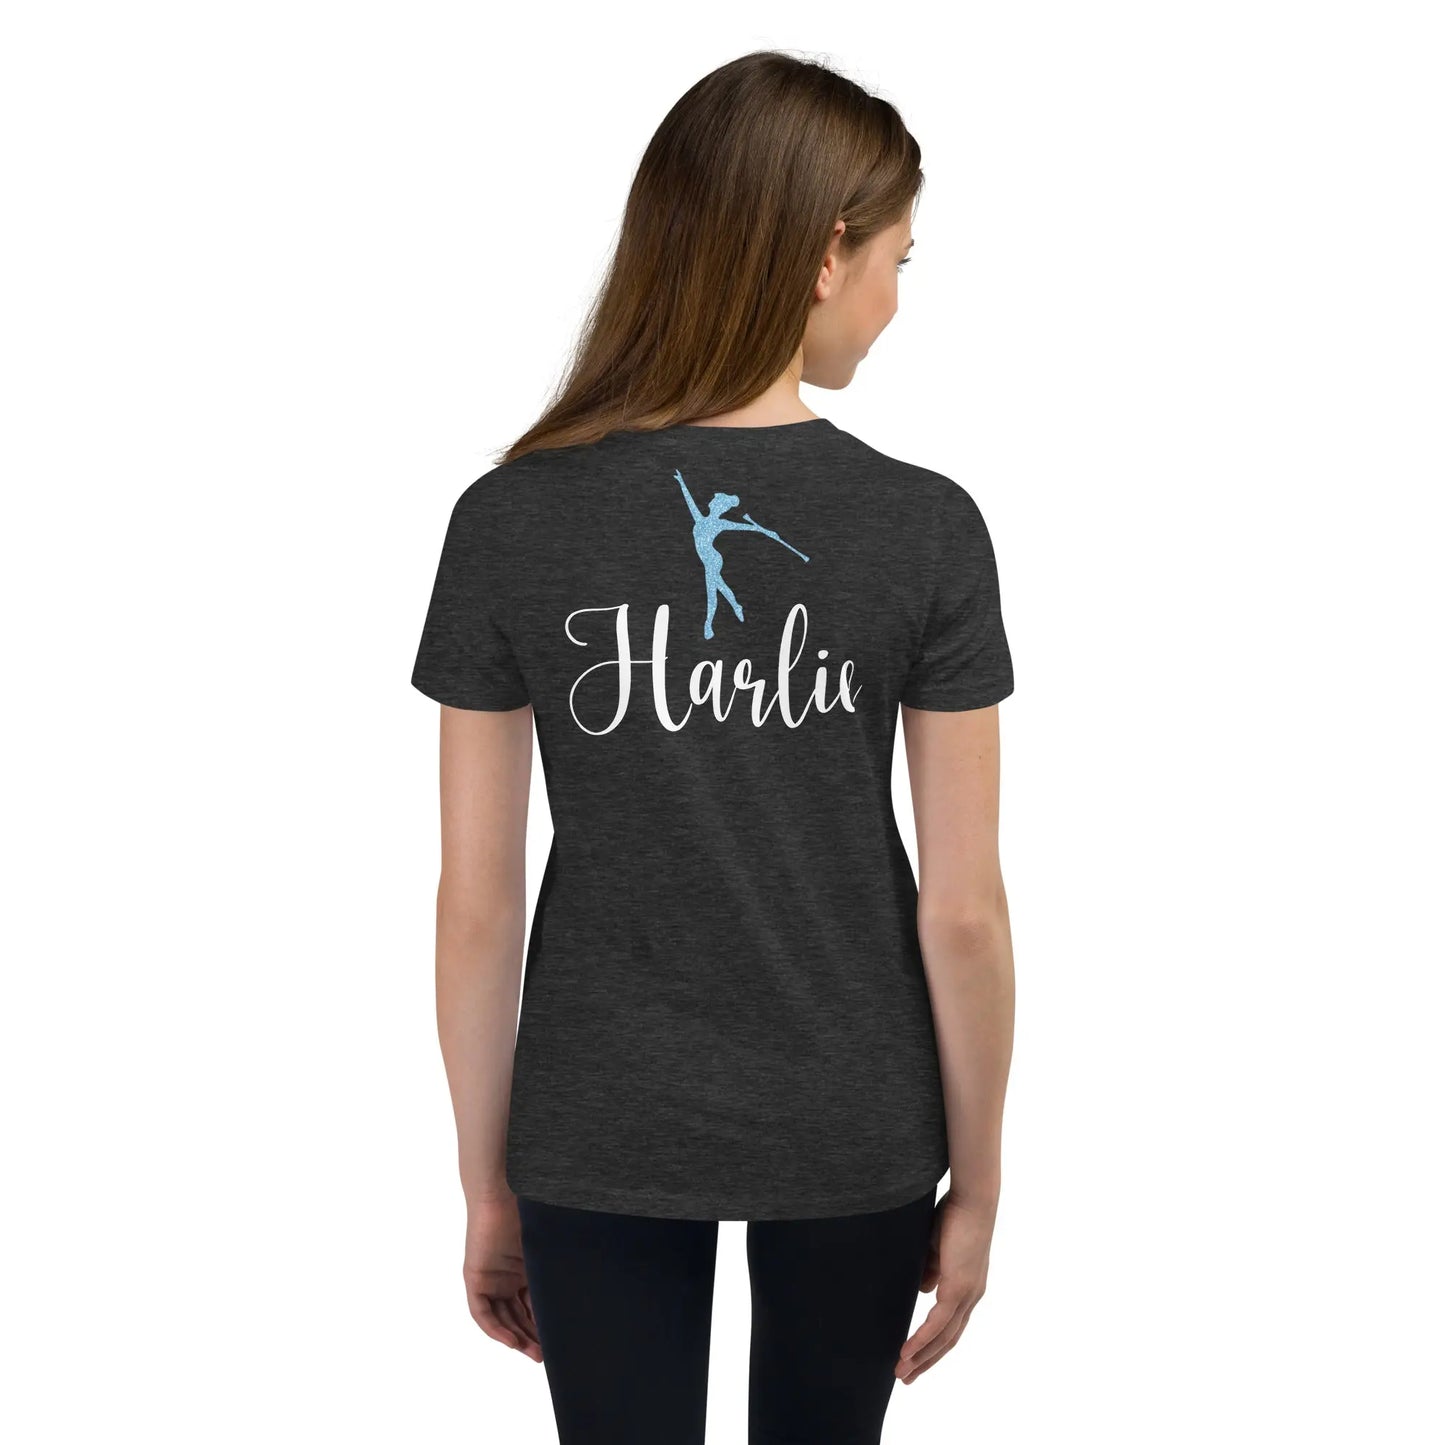 Twirler Youth Short Sleeve T-Shirt - Front and Back Print Amazing Faith Designs